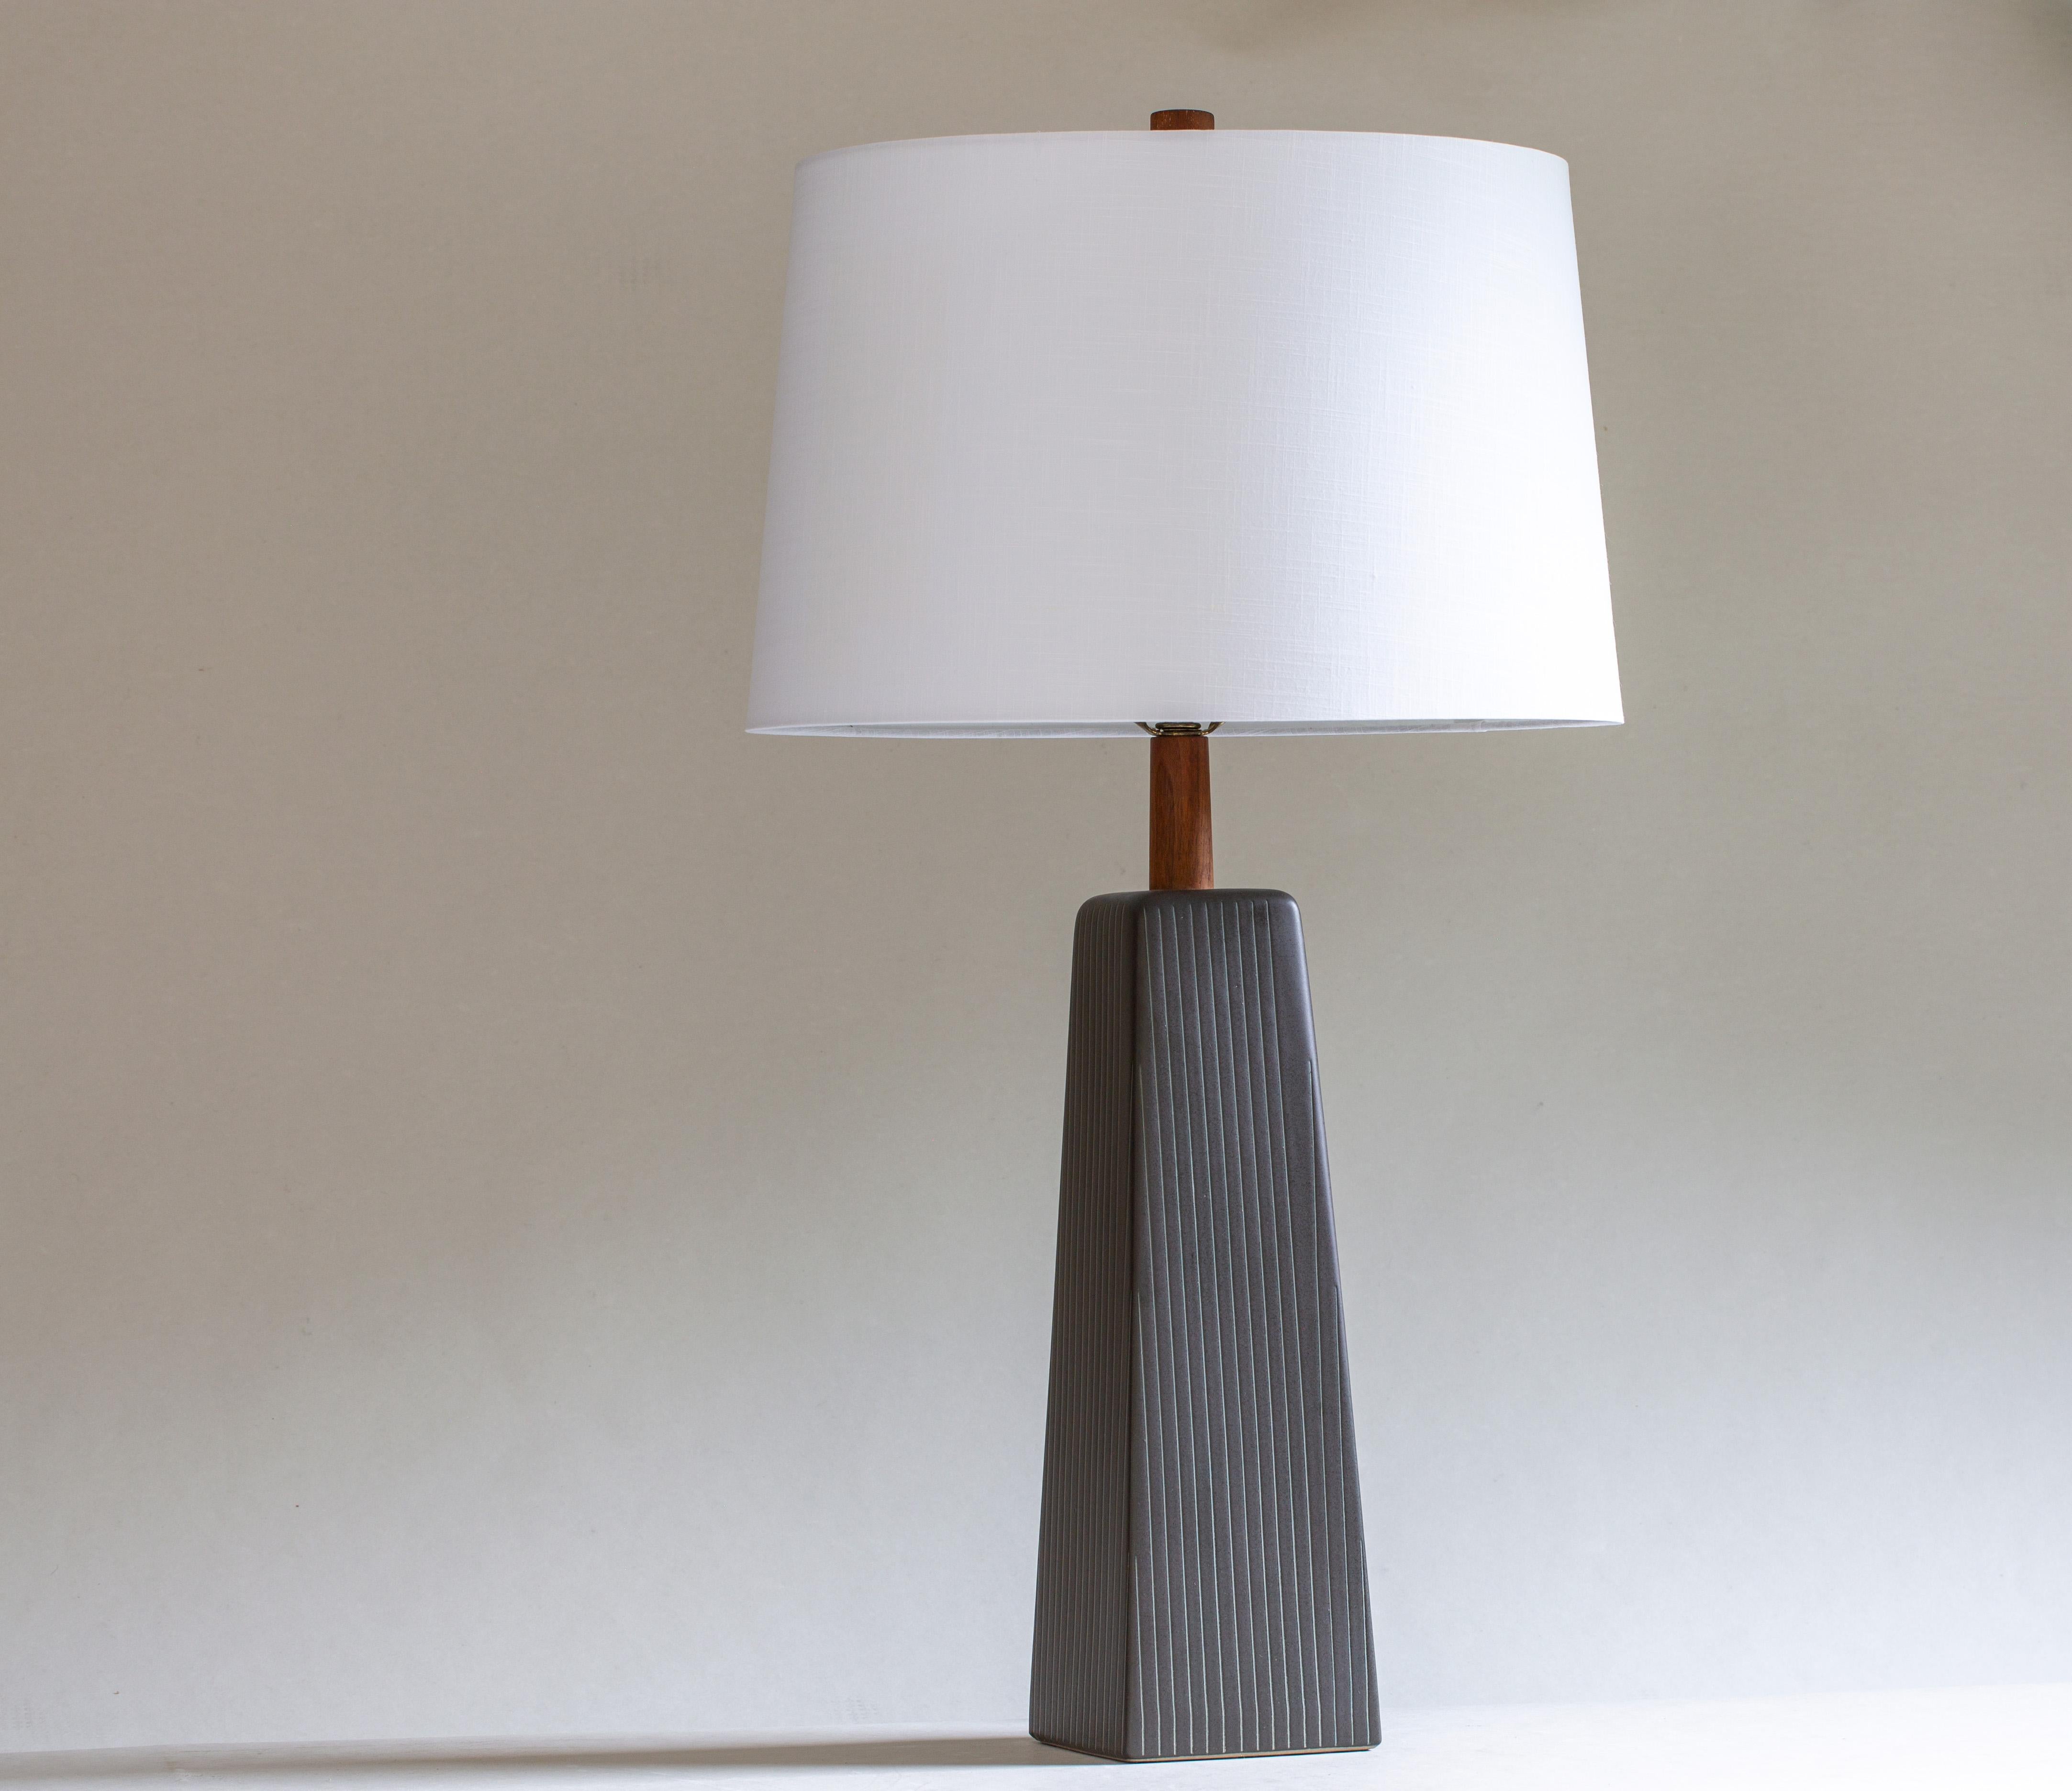 1960s Gordon and Jane Martz Geometric Table Lamp M216 for Marshall Studios Gray In Good Condition For Sale In Virginia Beach, VA